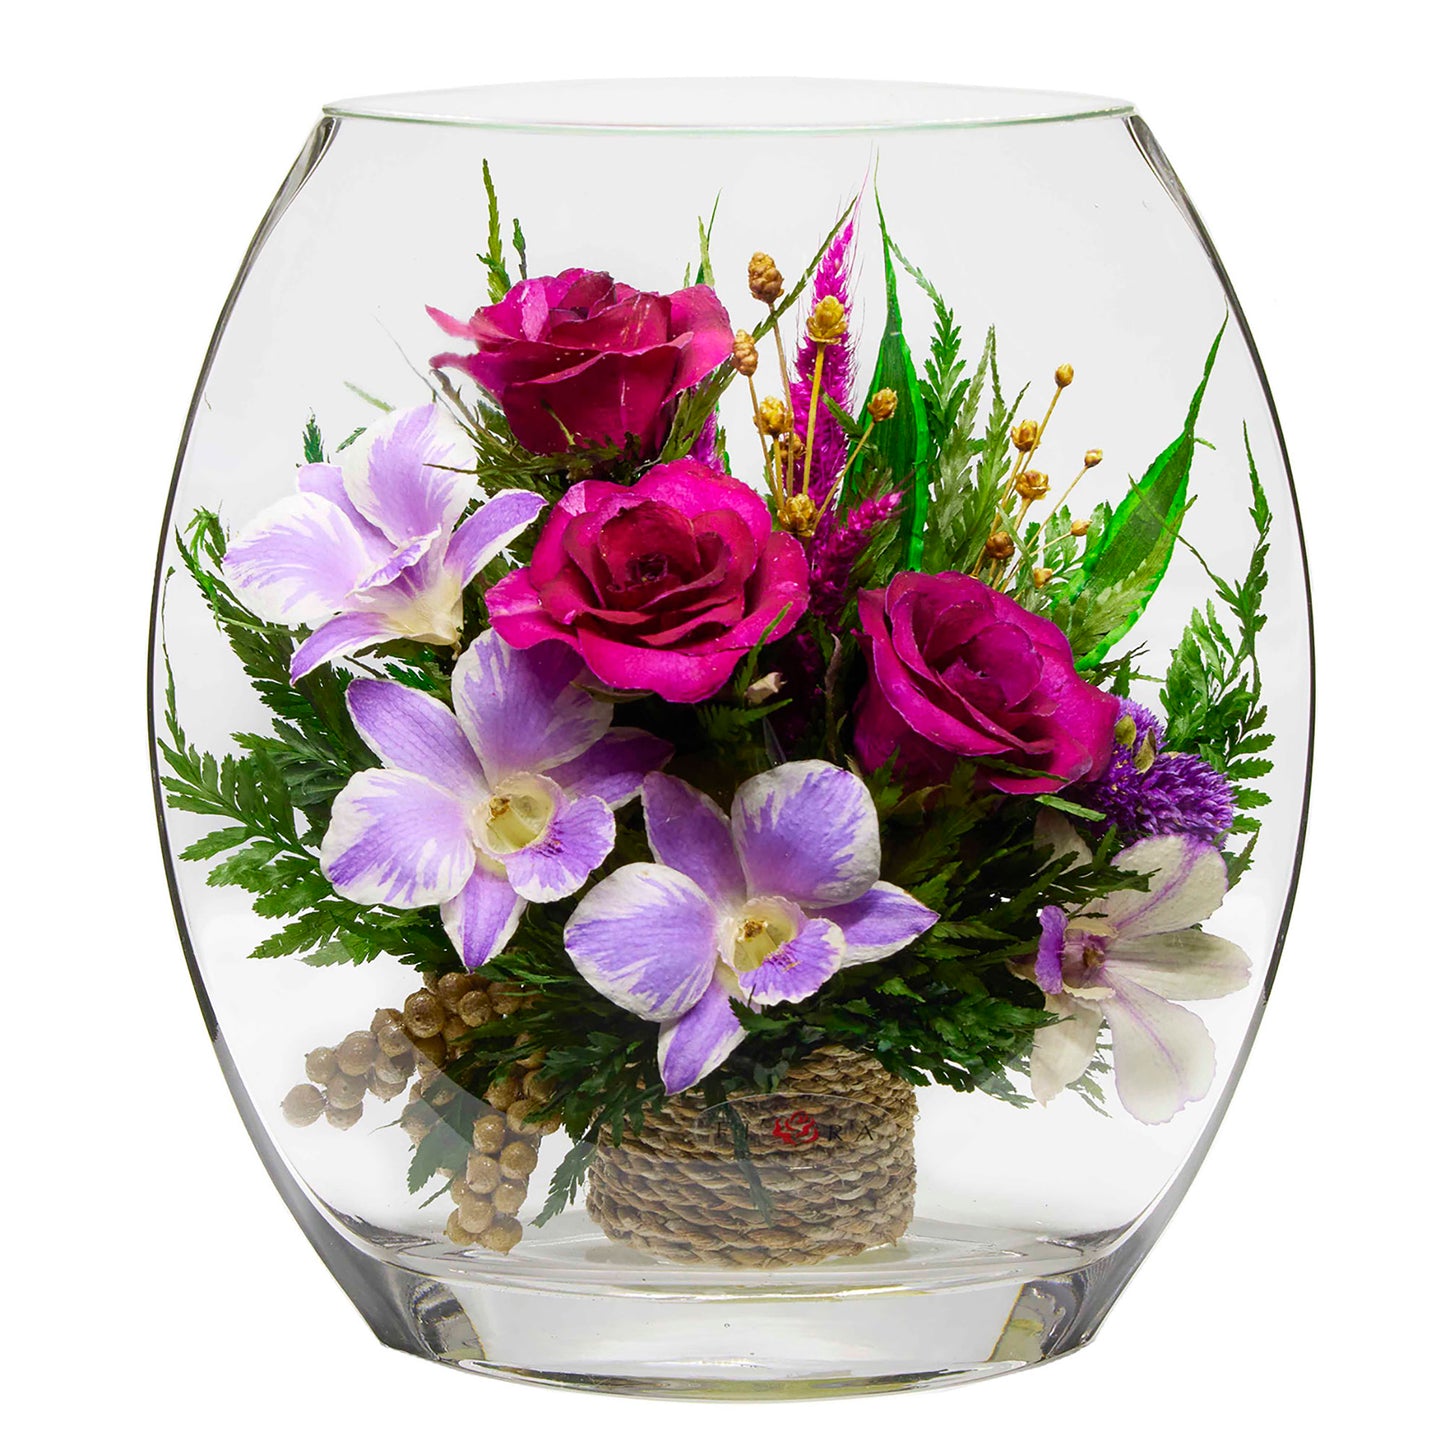 71331 Long-Lasting Purple Orchids and Roses in a Flat Rugby Glass Vase